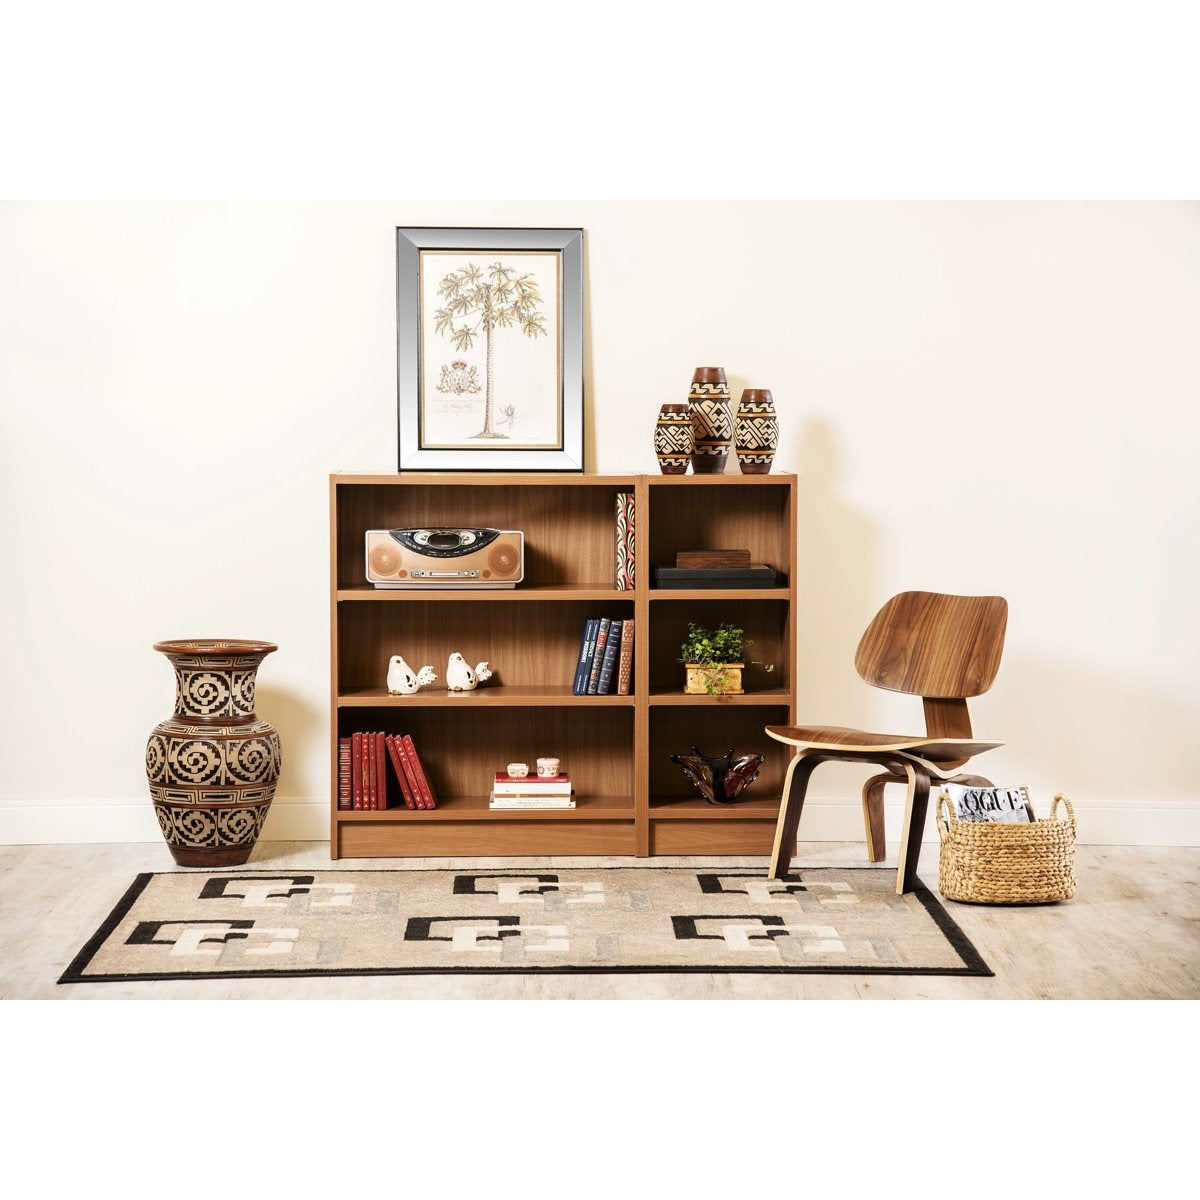 Manhattan Comfort Greenwich 2- Piece Lower Bookcase with 6 Wide and Narrow Shelves in Maple Cream-Minimal & Modern